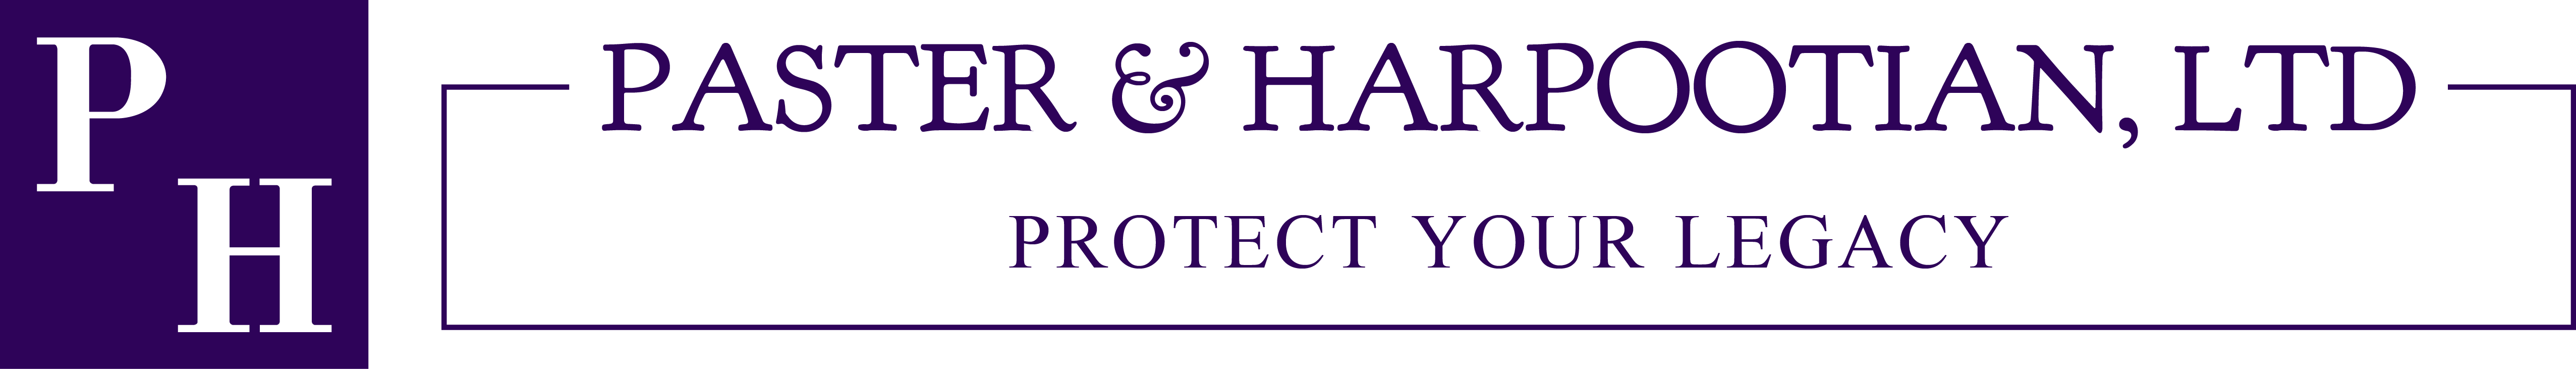 Paster & Harpootian, Ltd | Protect Your Legacy